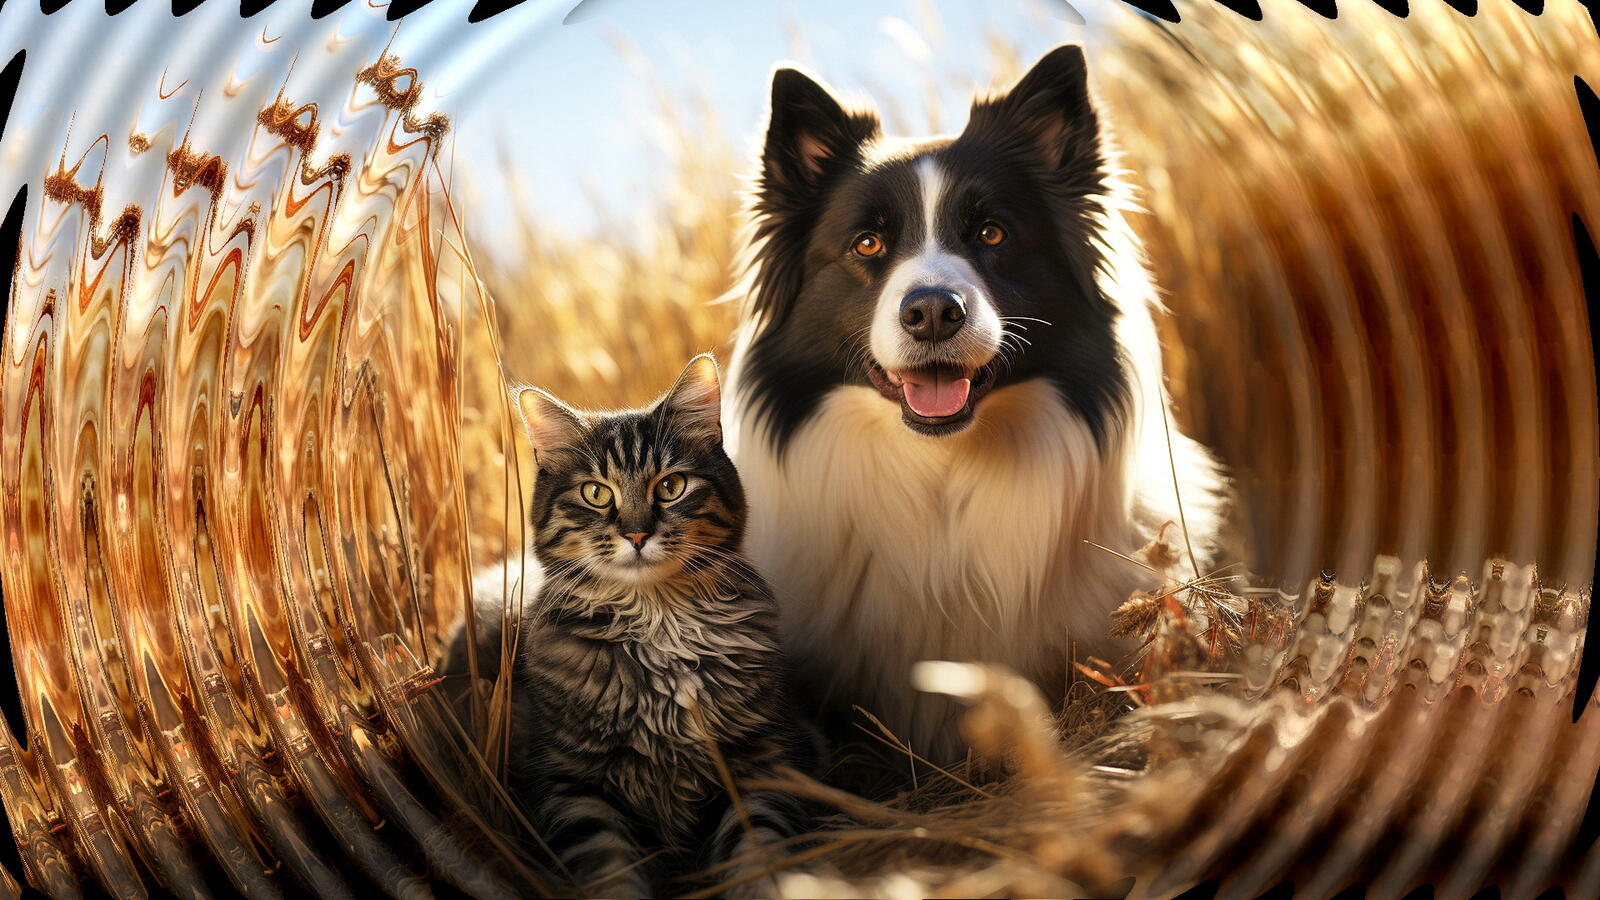 Free photo A cat and a dog in a field